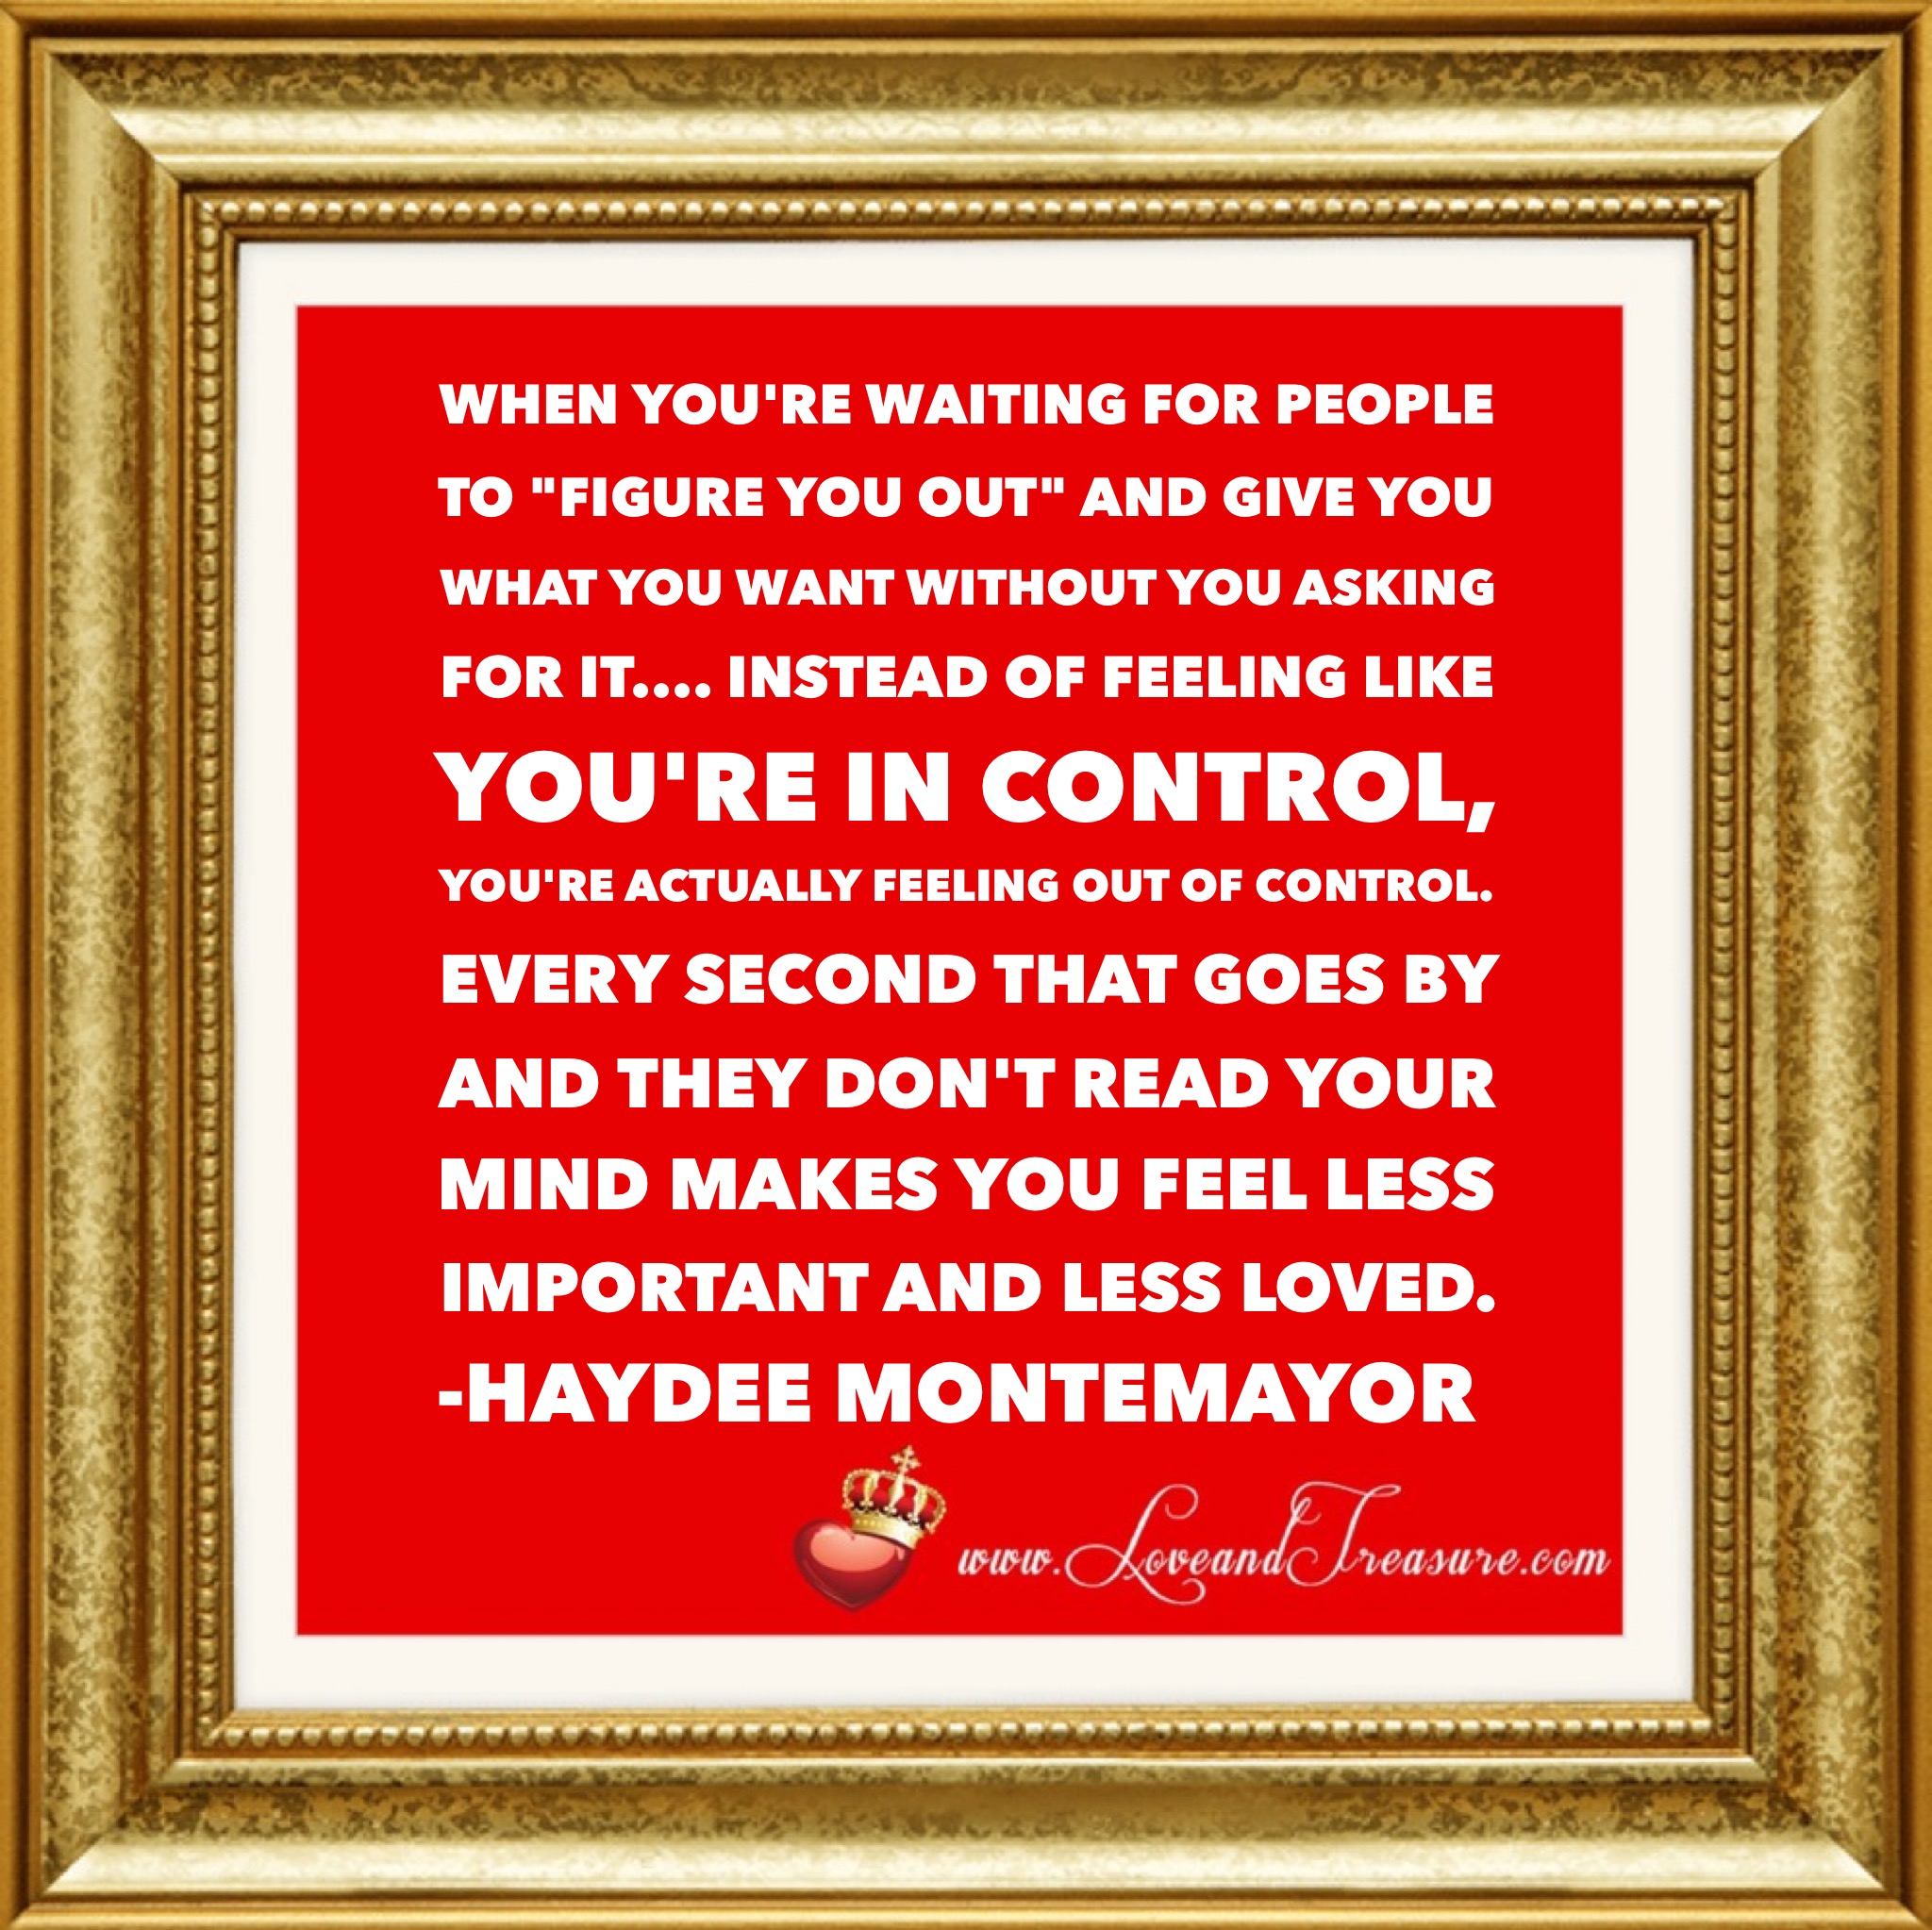 When you're waiting for people to figure you out and give you what you want without you asking for it, instead of feeling like you're in control, you're actually feeling like you're out of control. Every second that goes by and they don't read your mind makes you feel less important and less loved. Quotation by Haydee Montemayor from Love and Treasure blog at www.loveandtreasure.com